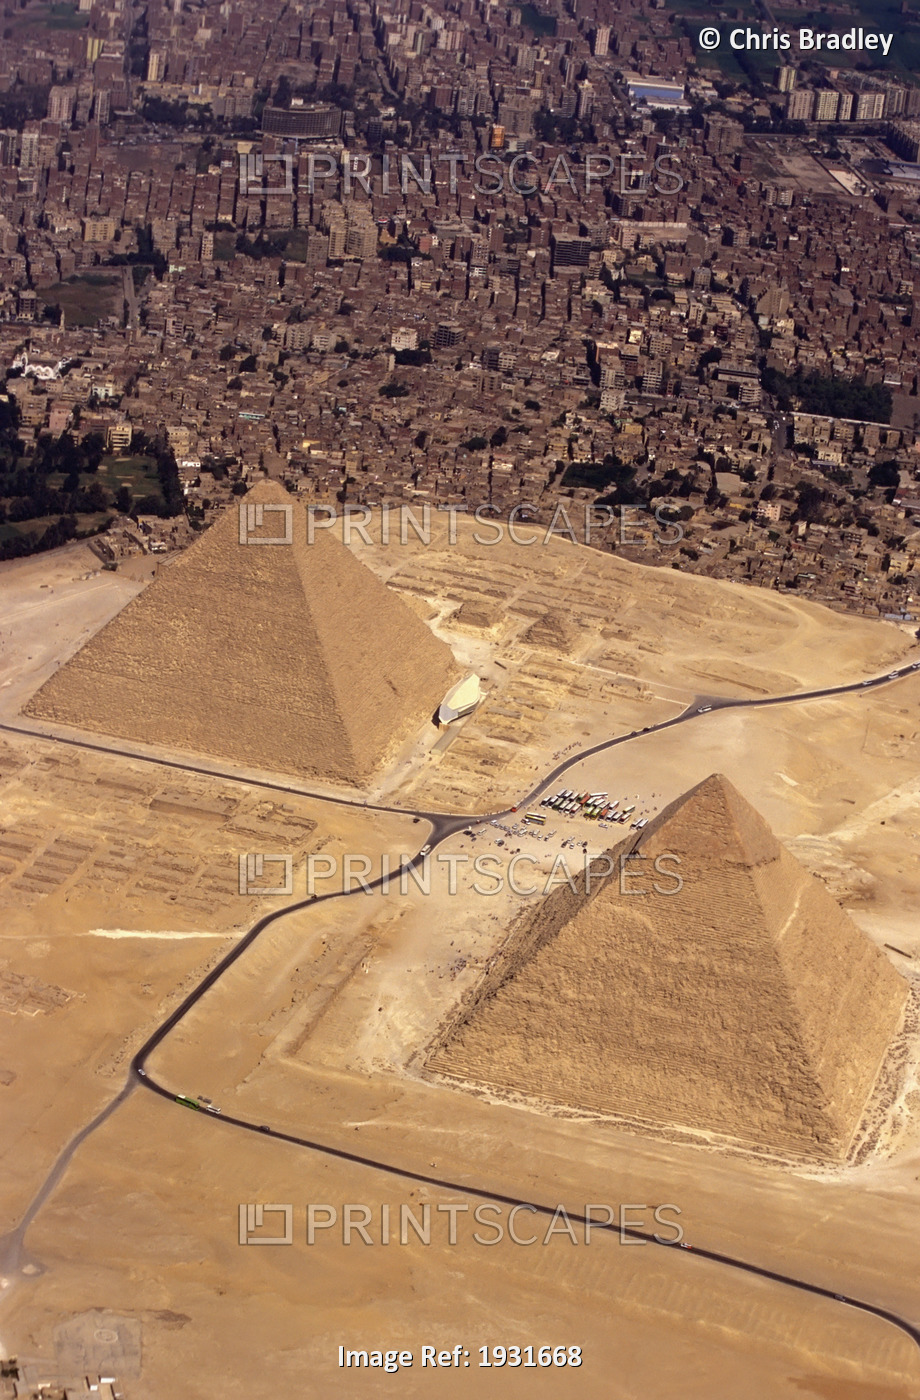 Aerial View Of Great Cheops & Chaphren Pyramids, Giza, Egypt; Giza, Egypt